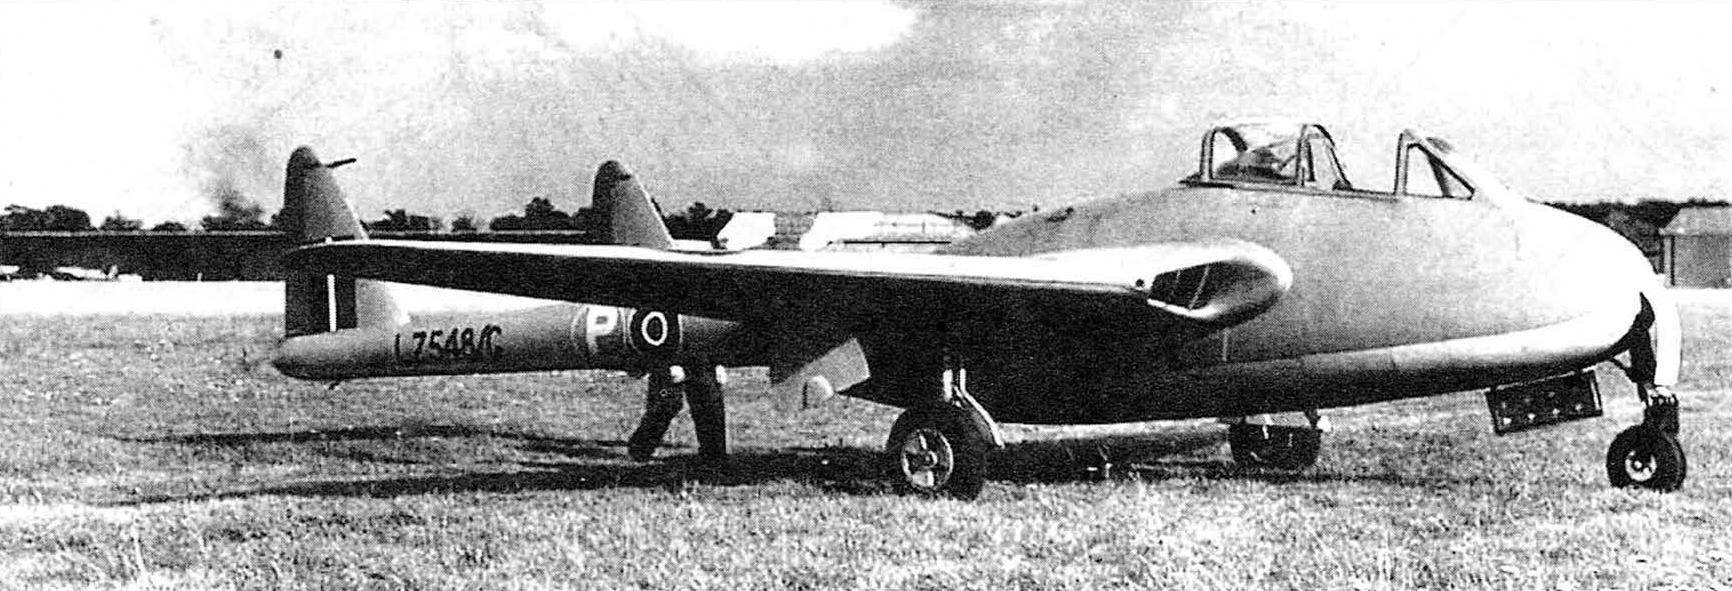 The first prototype of the DH. 100 (LZ548) during the test, 1943.